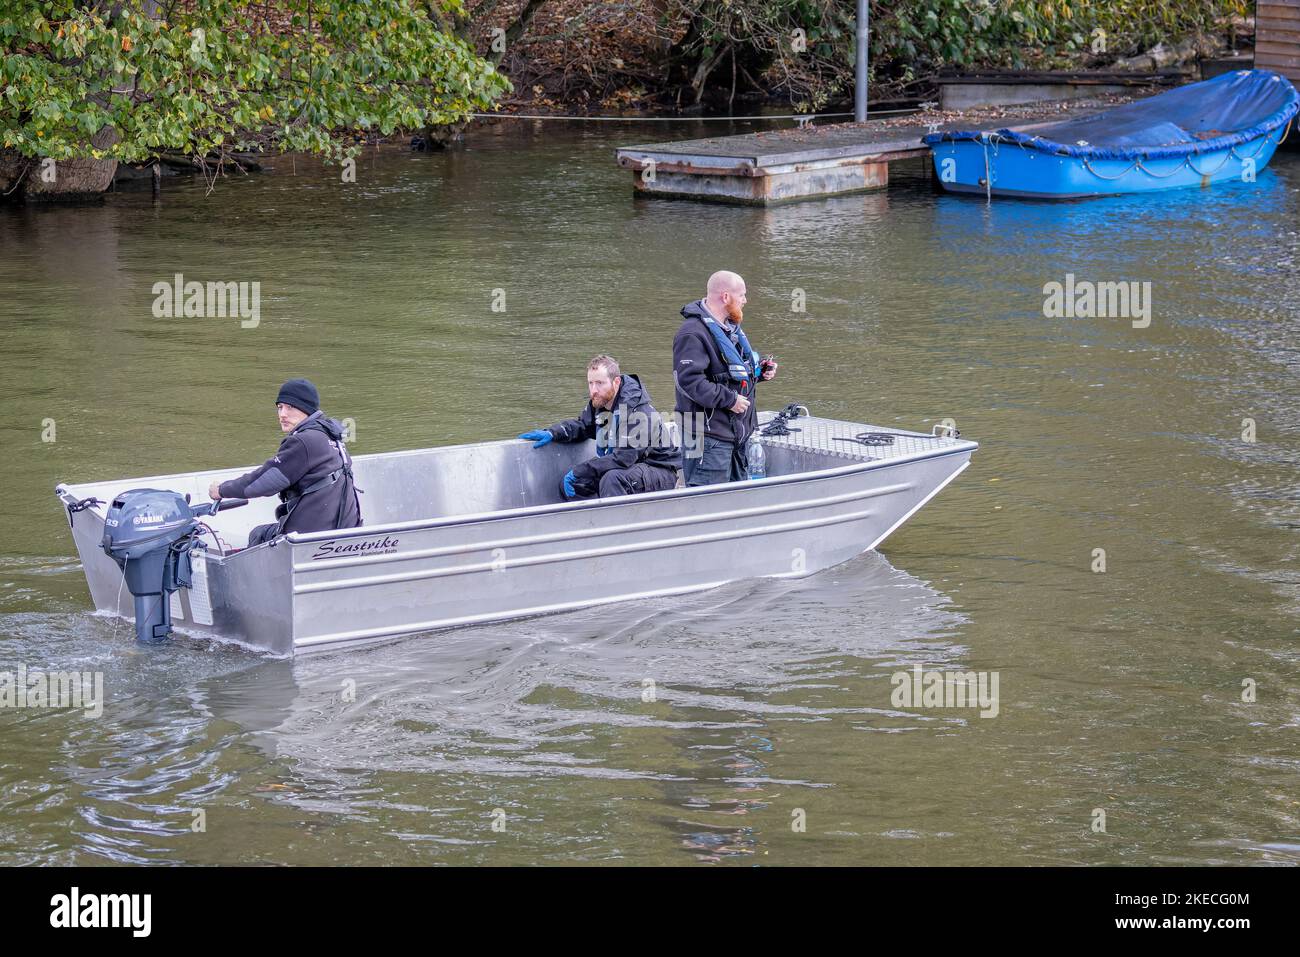 Boat containing three Environment Agency officers checking for pollution on the River Avon, Stratford upon Avon, Warwickshire, UK on 8 November 2022 Stock Photo